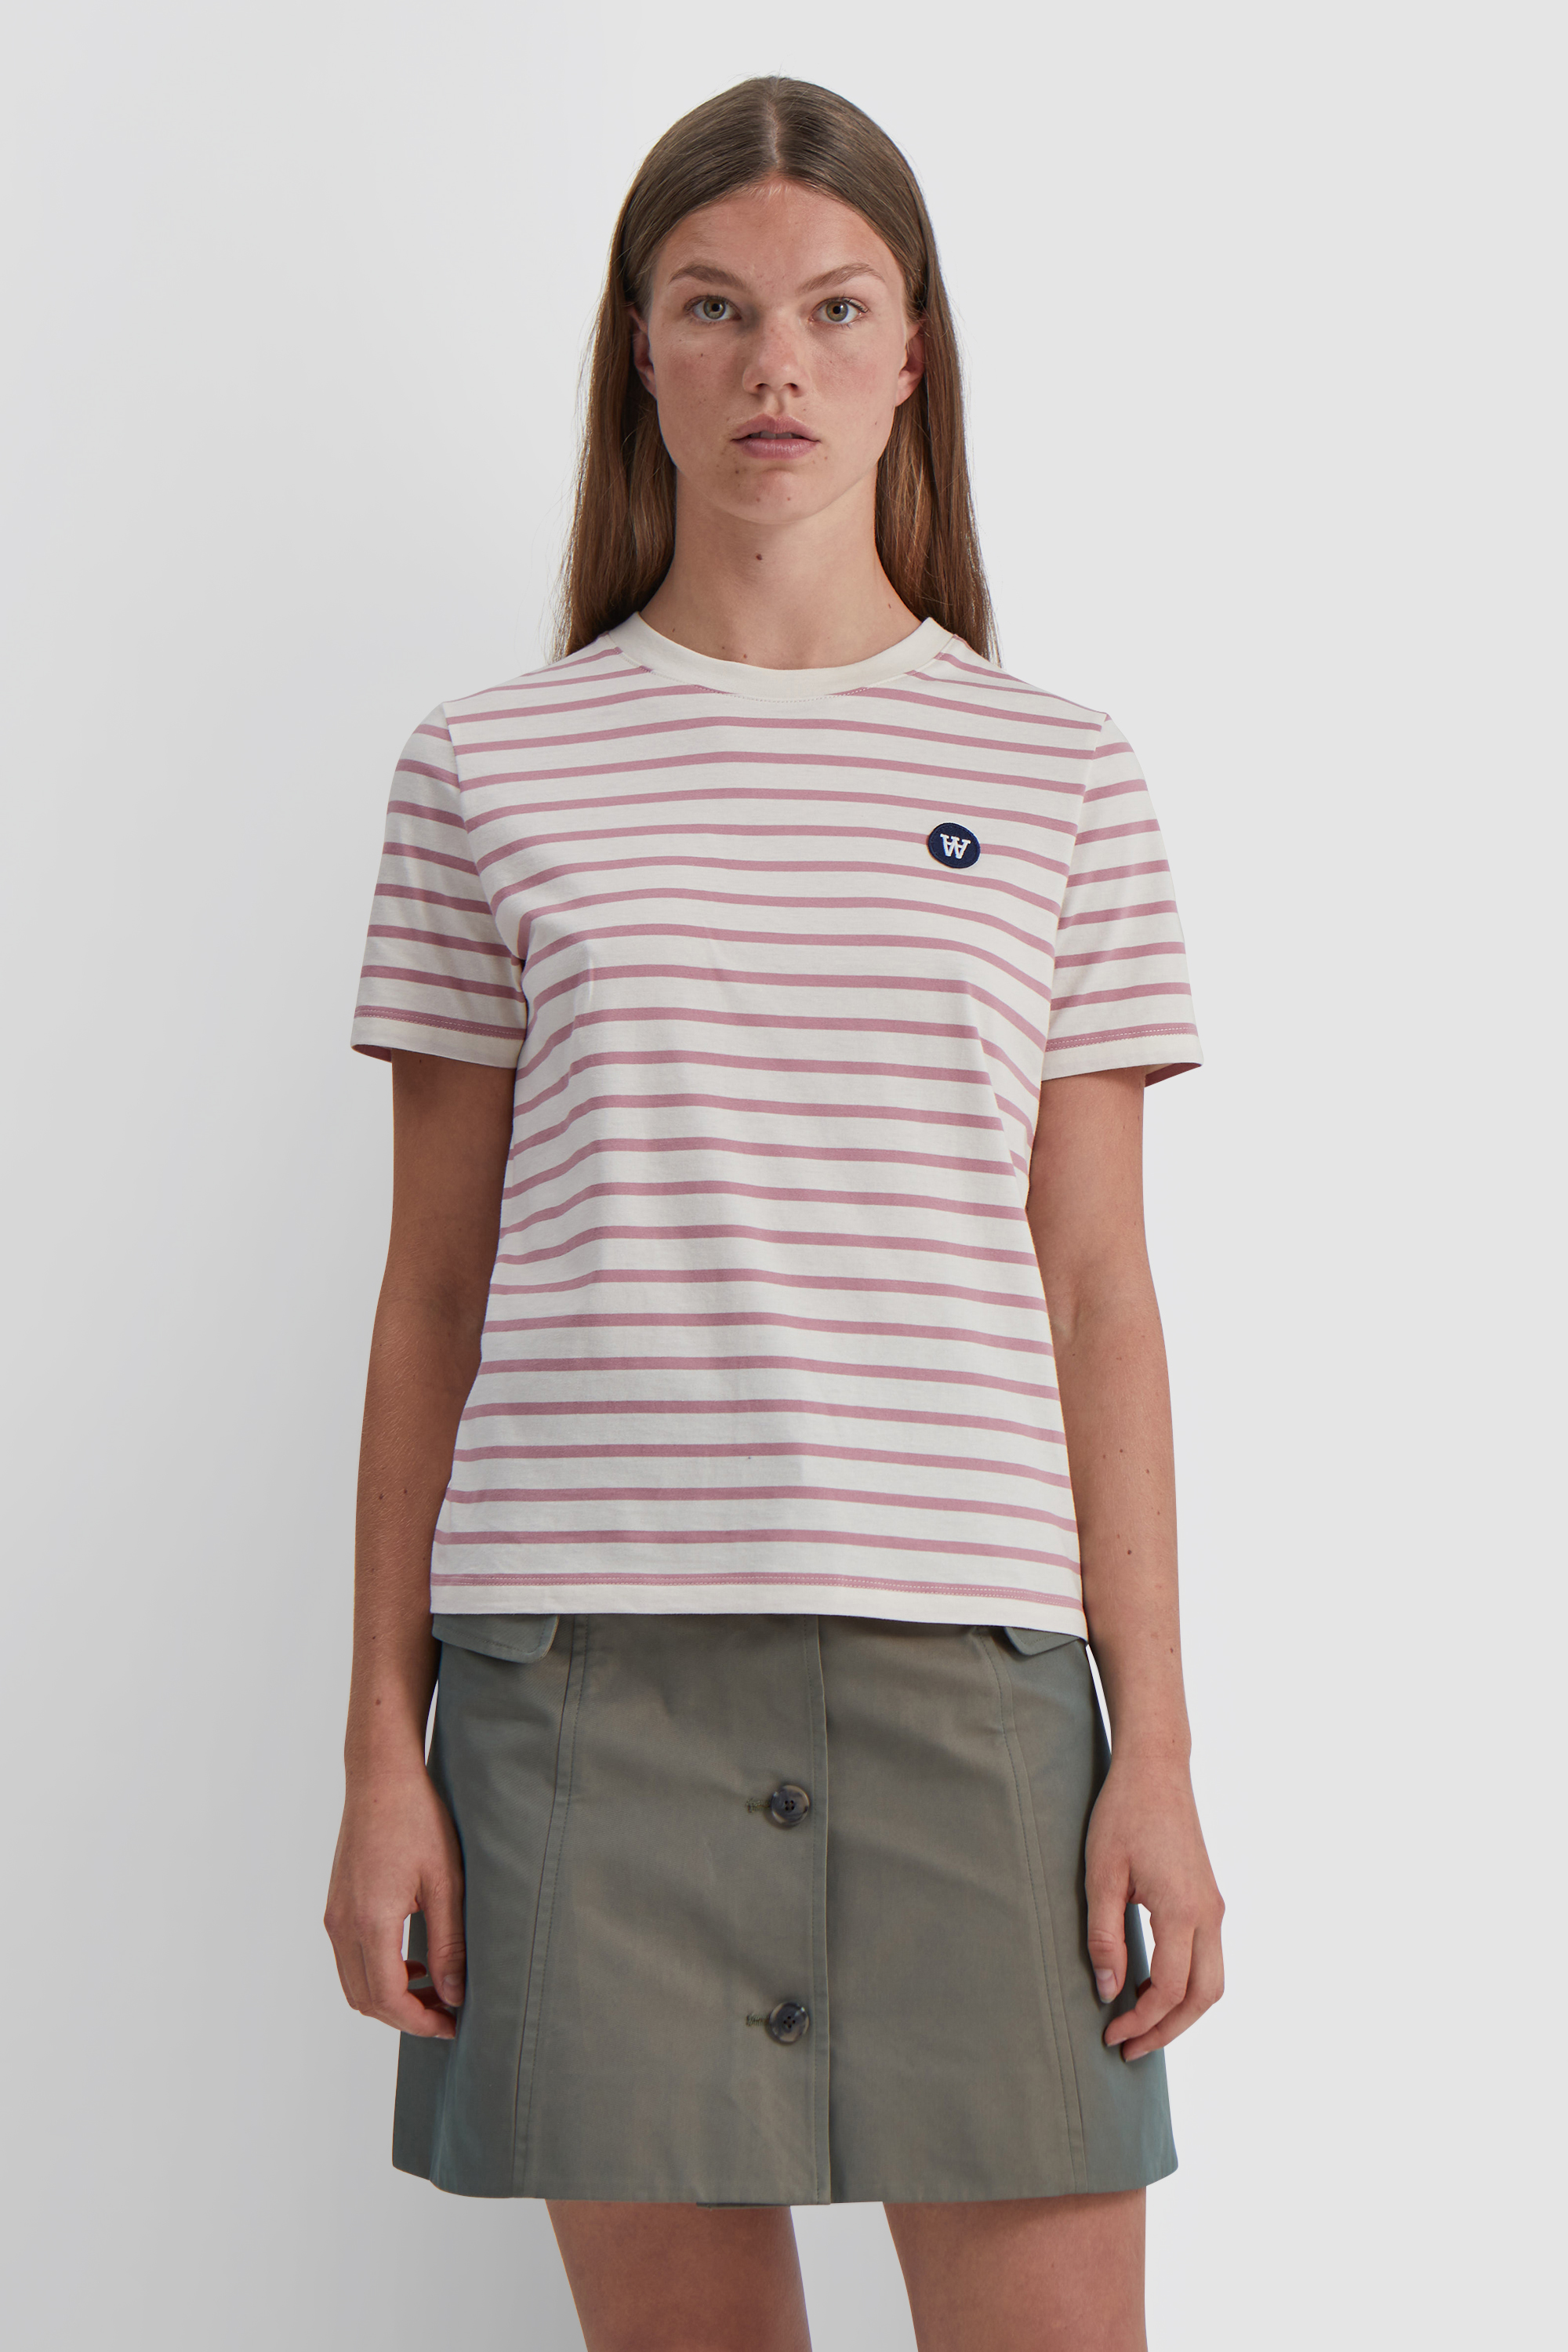 gas Interpretive Melbourne Double A by Wood Wood Mia T-shirt Off-white/rose stripes | WoodWood.com